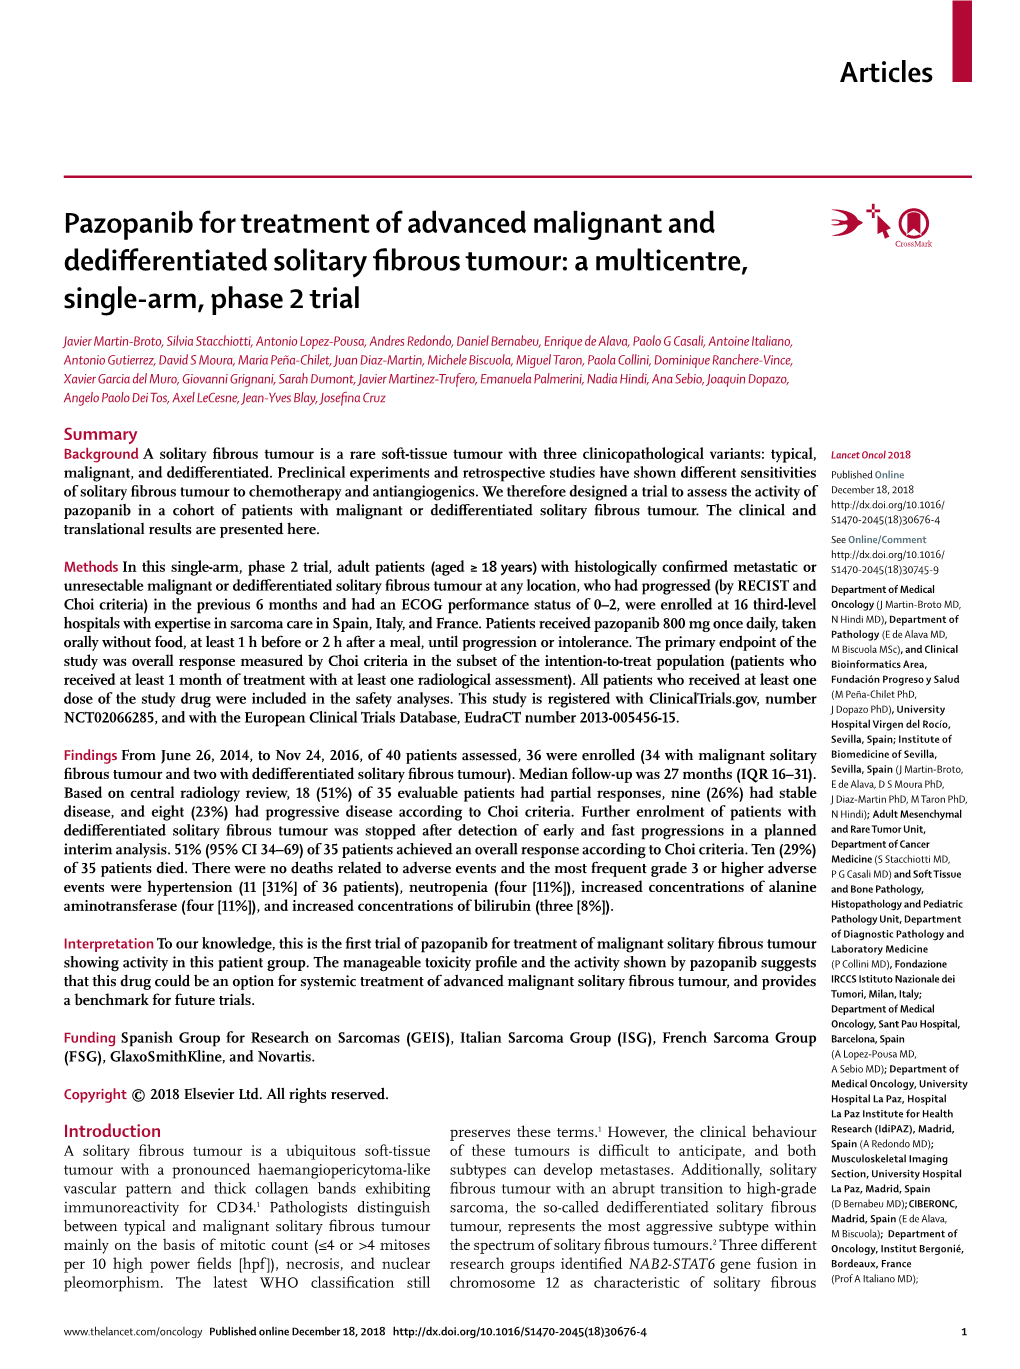 Pazopanib for Treatment of Advanced Malignant and Dedifferentiated Solitary Fibrous Tumour: a Multicentre, Single-Arm, Phase 2 Trial